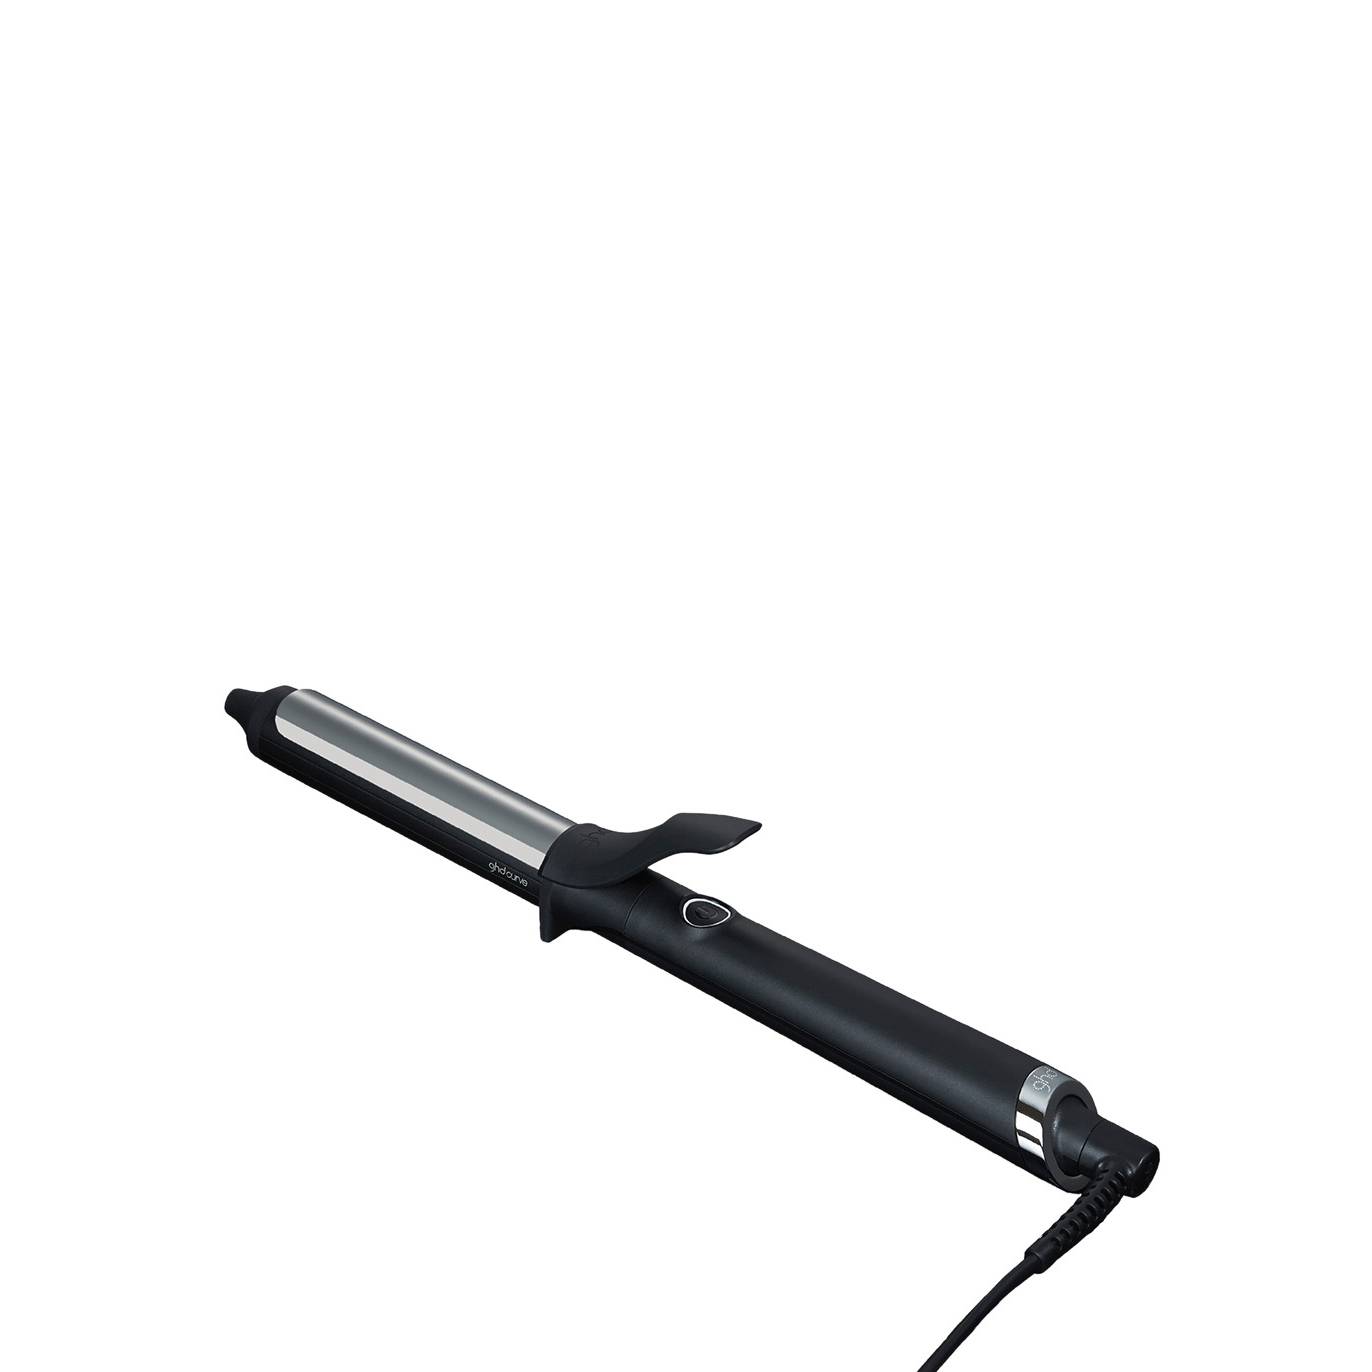 Ghd Curve Classic Tong